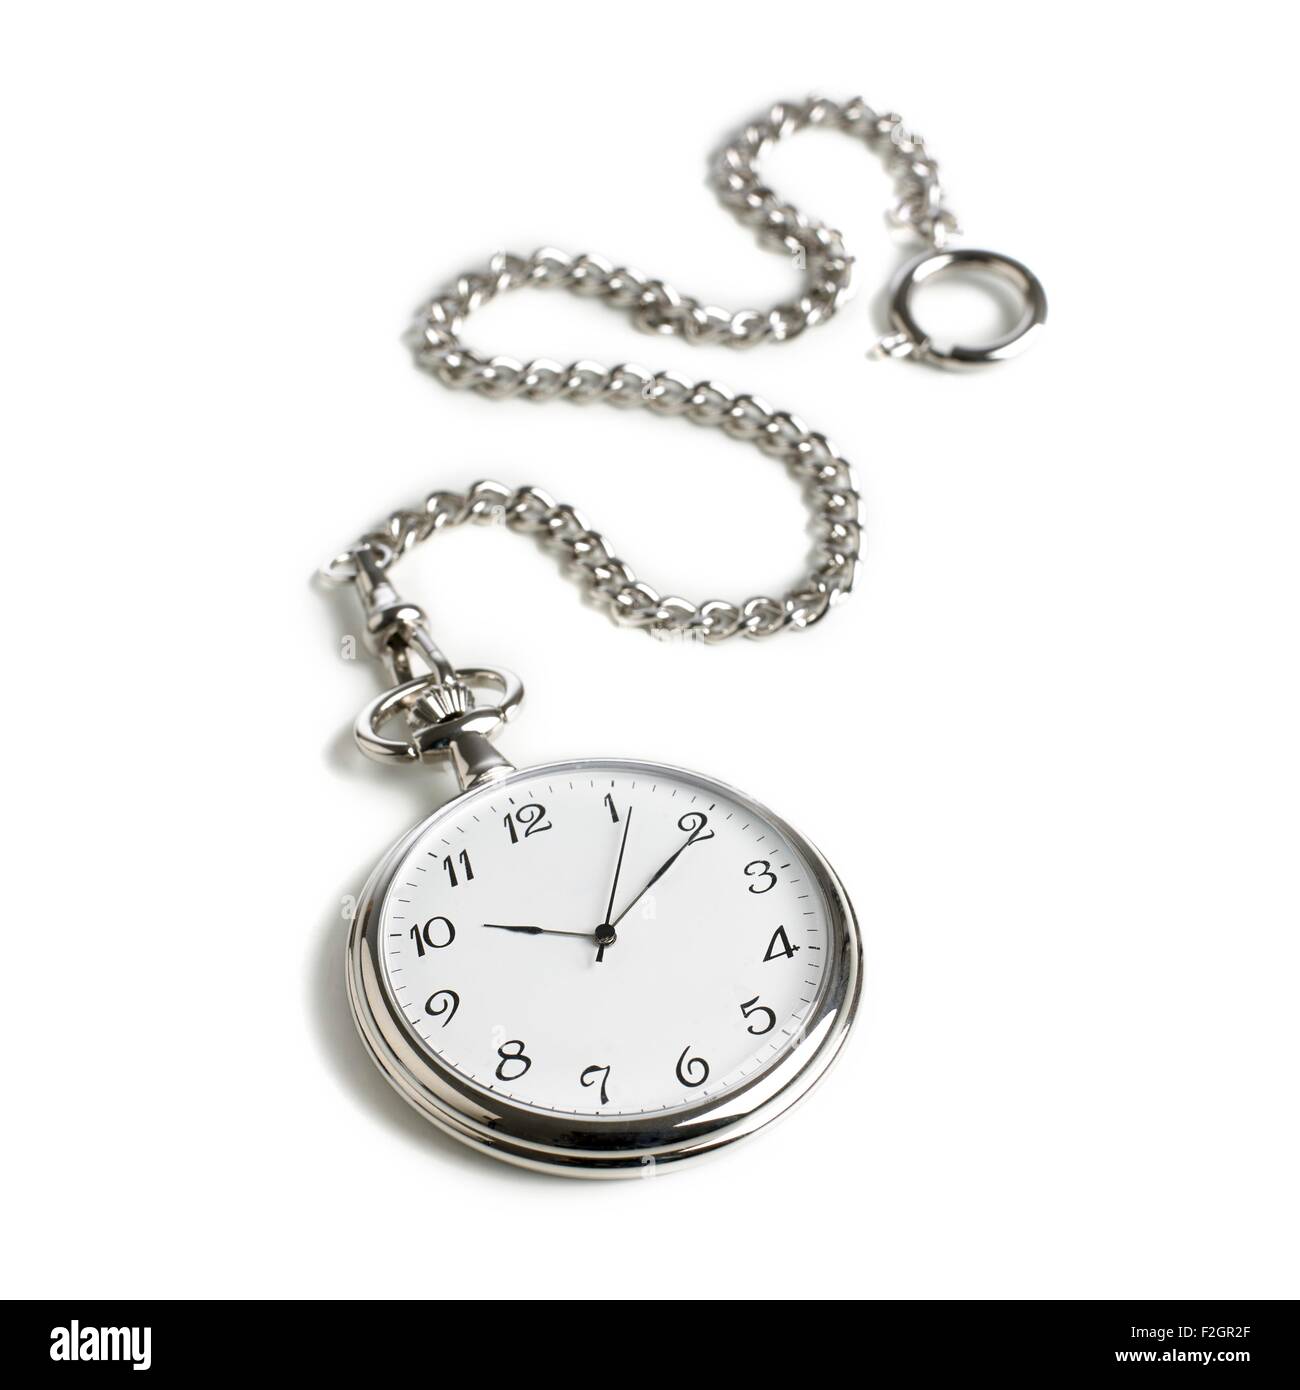 Traditional pocket watch Stock Photo